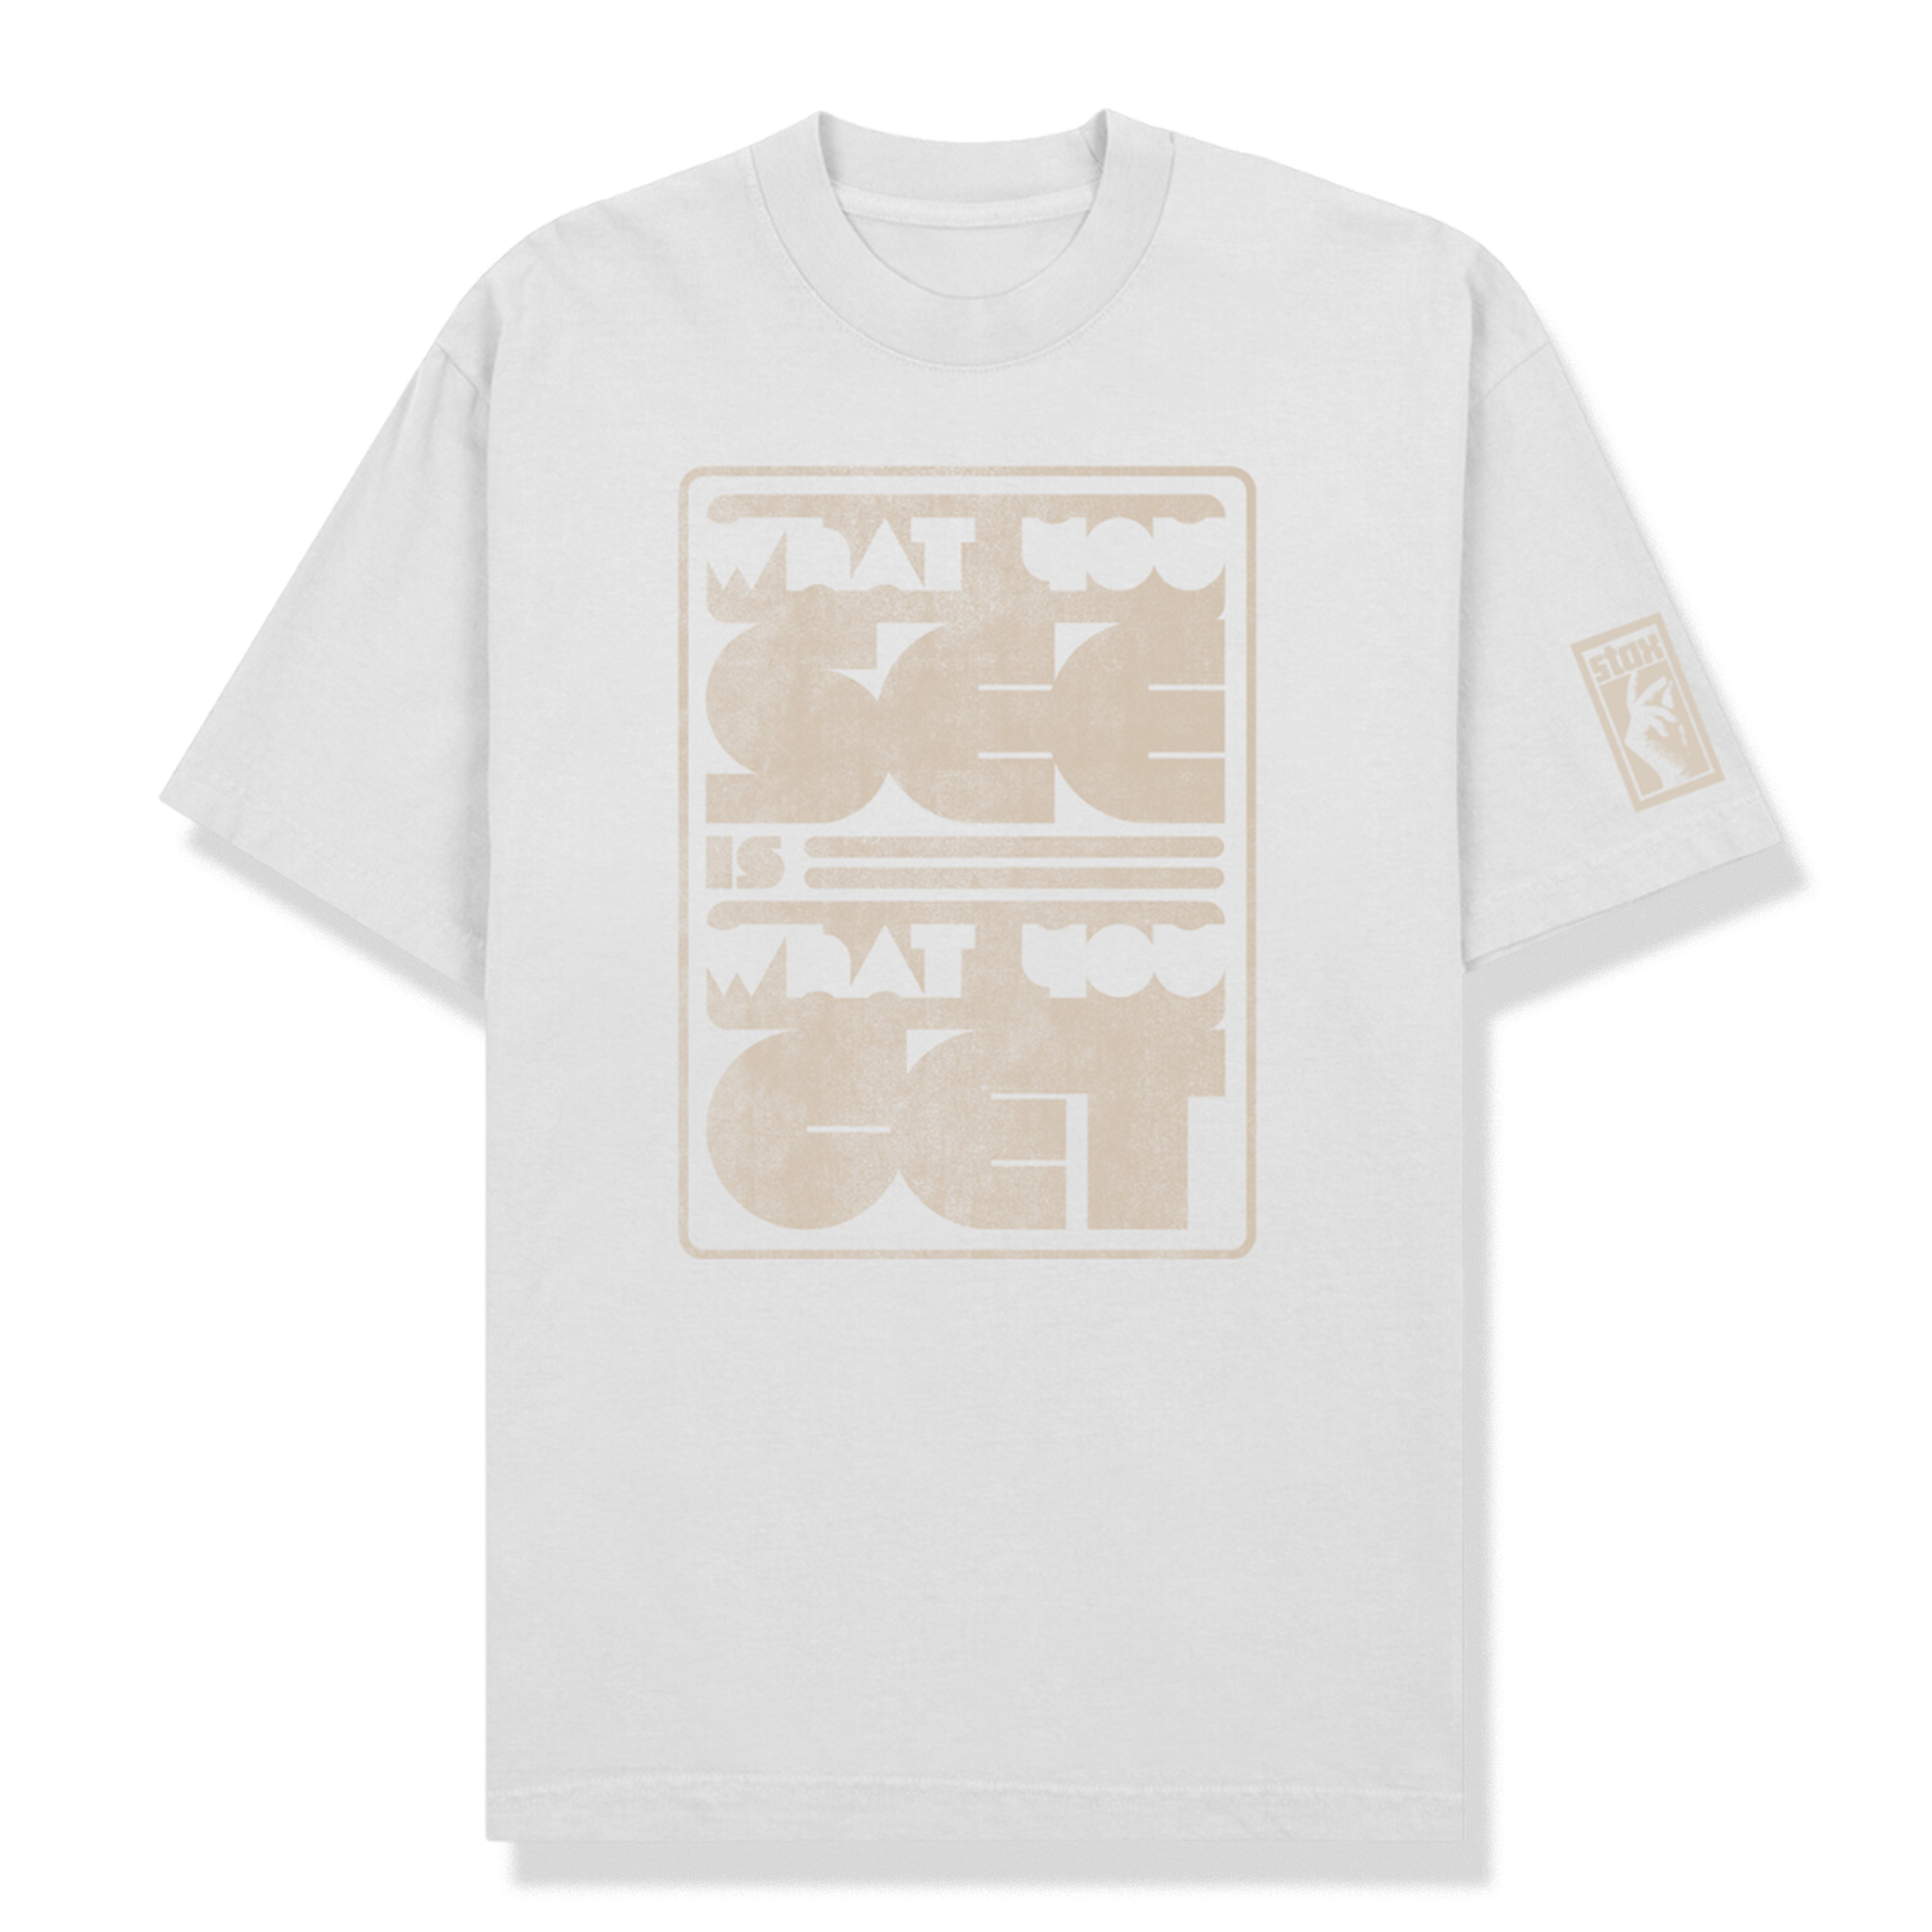 What You See is What You Get Tee (Vintage White)